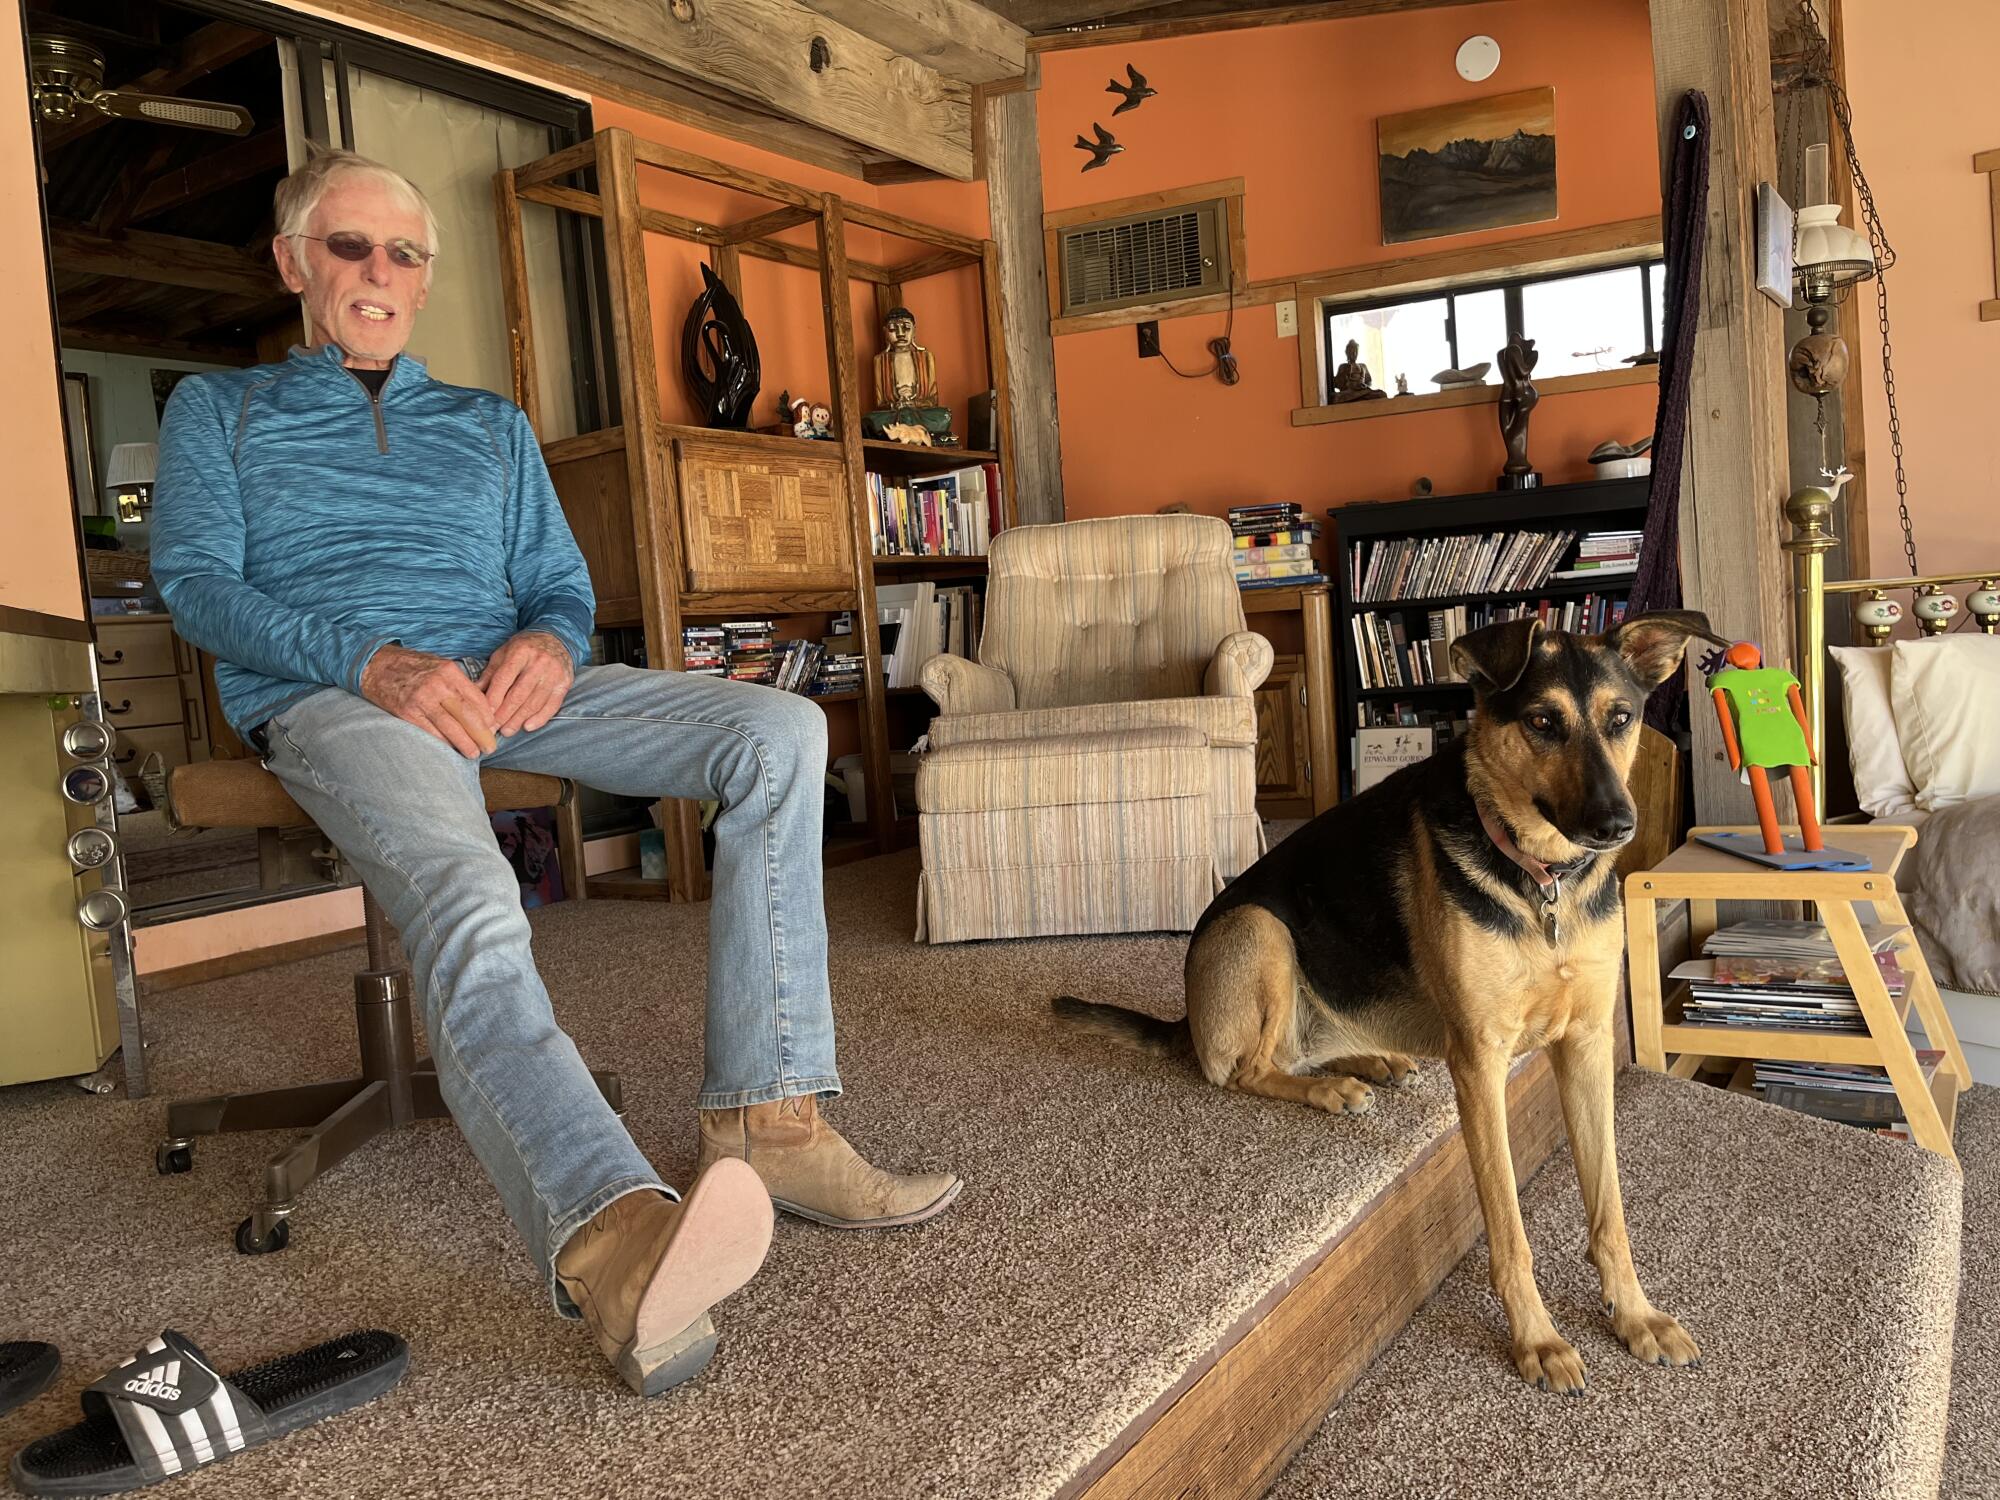 Darwin resident and sculptor Jim Hunolt sits in in home with his dog, Sabi.